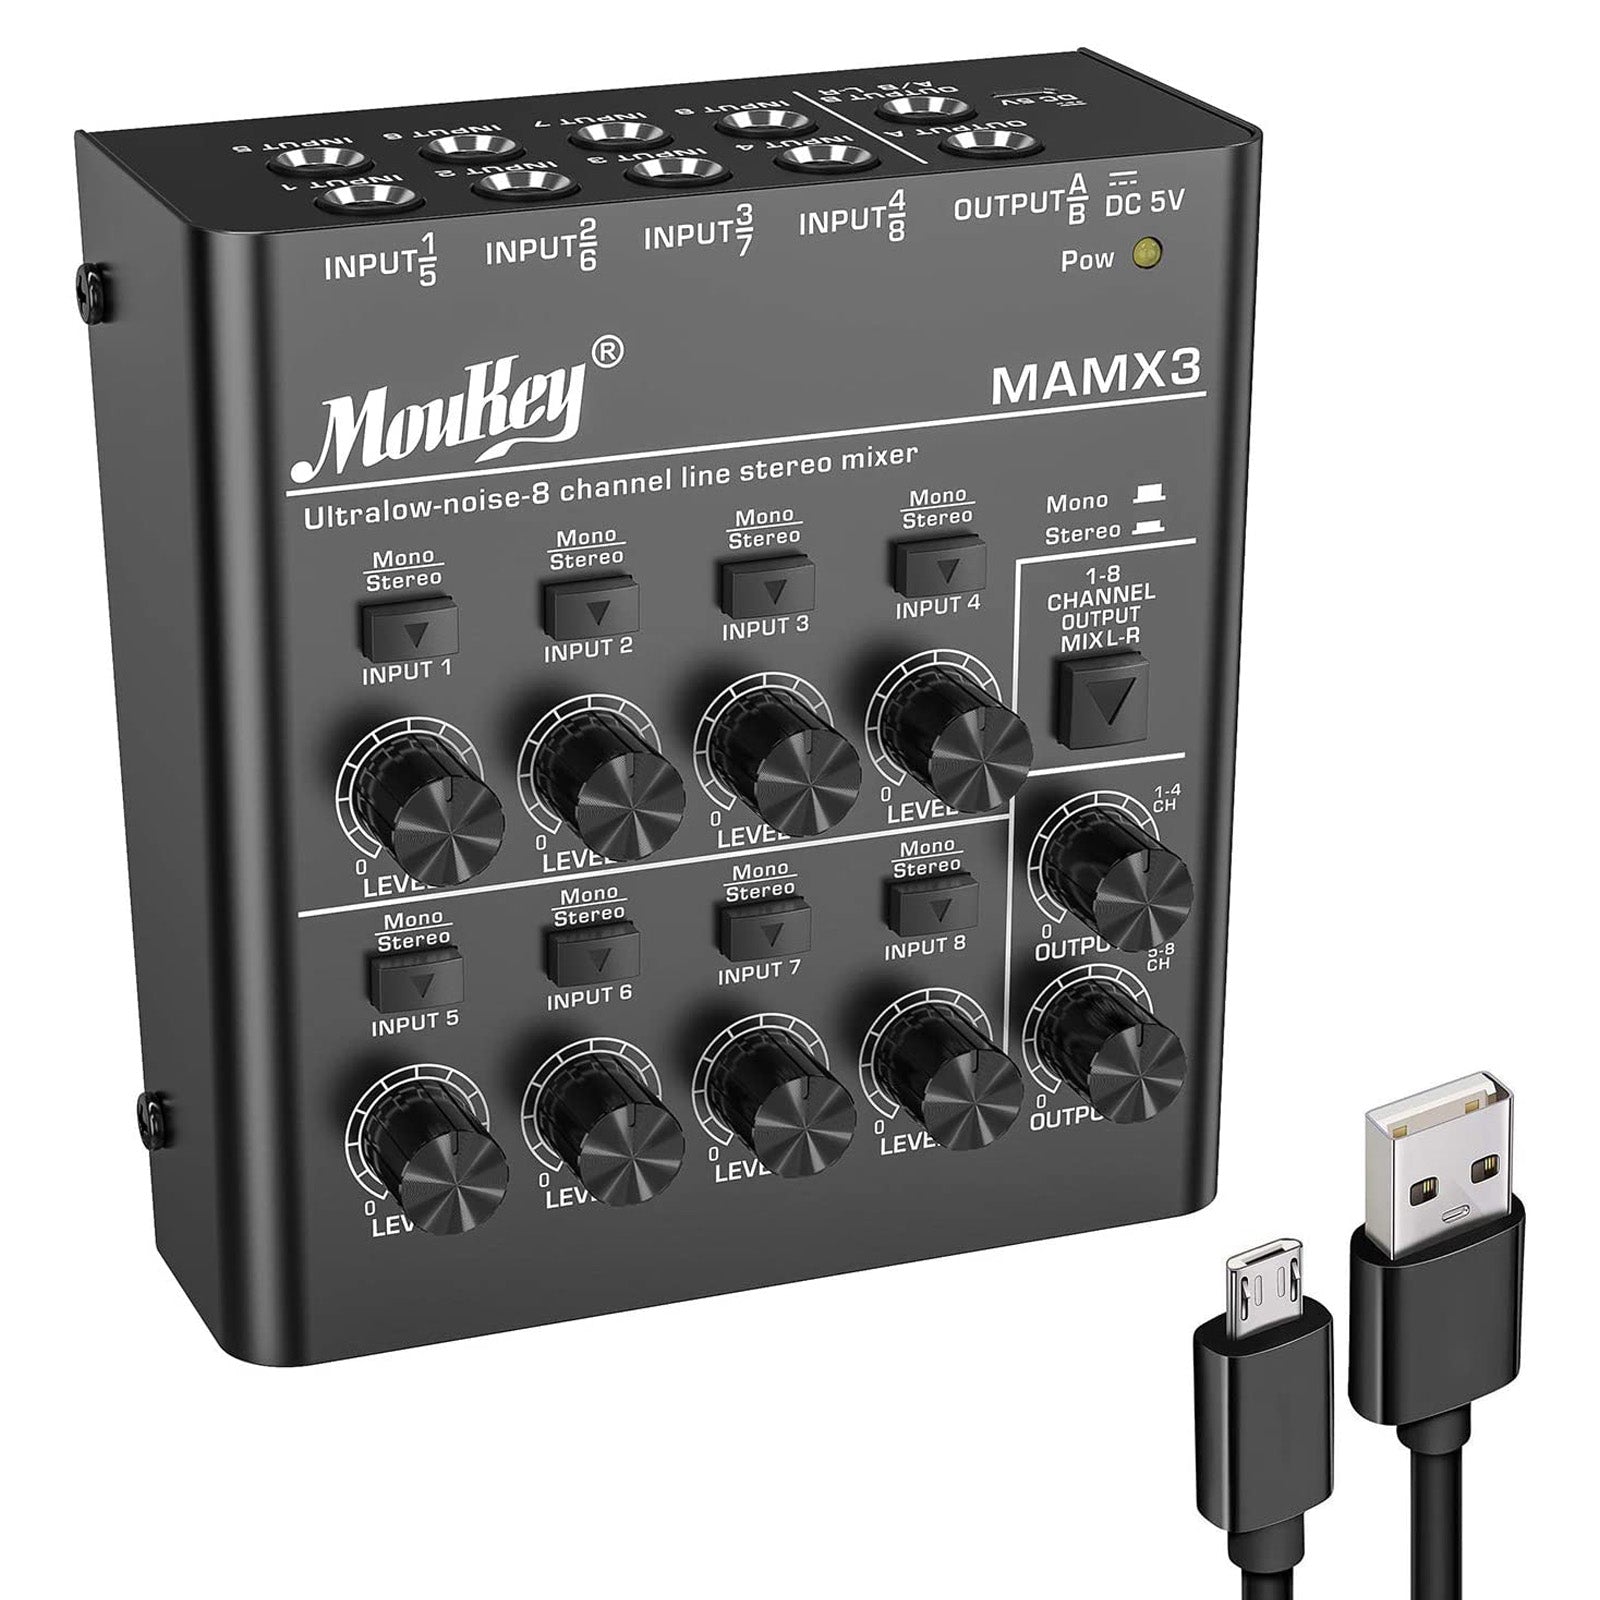 

Moukey MAMX3 Ultra Low-Noise 8-Channel Line Mixer